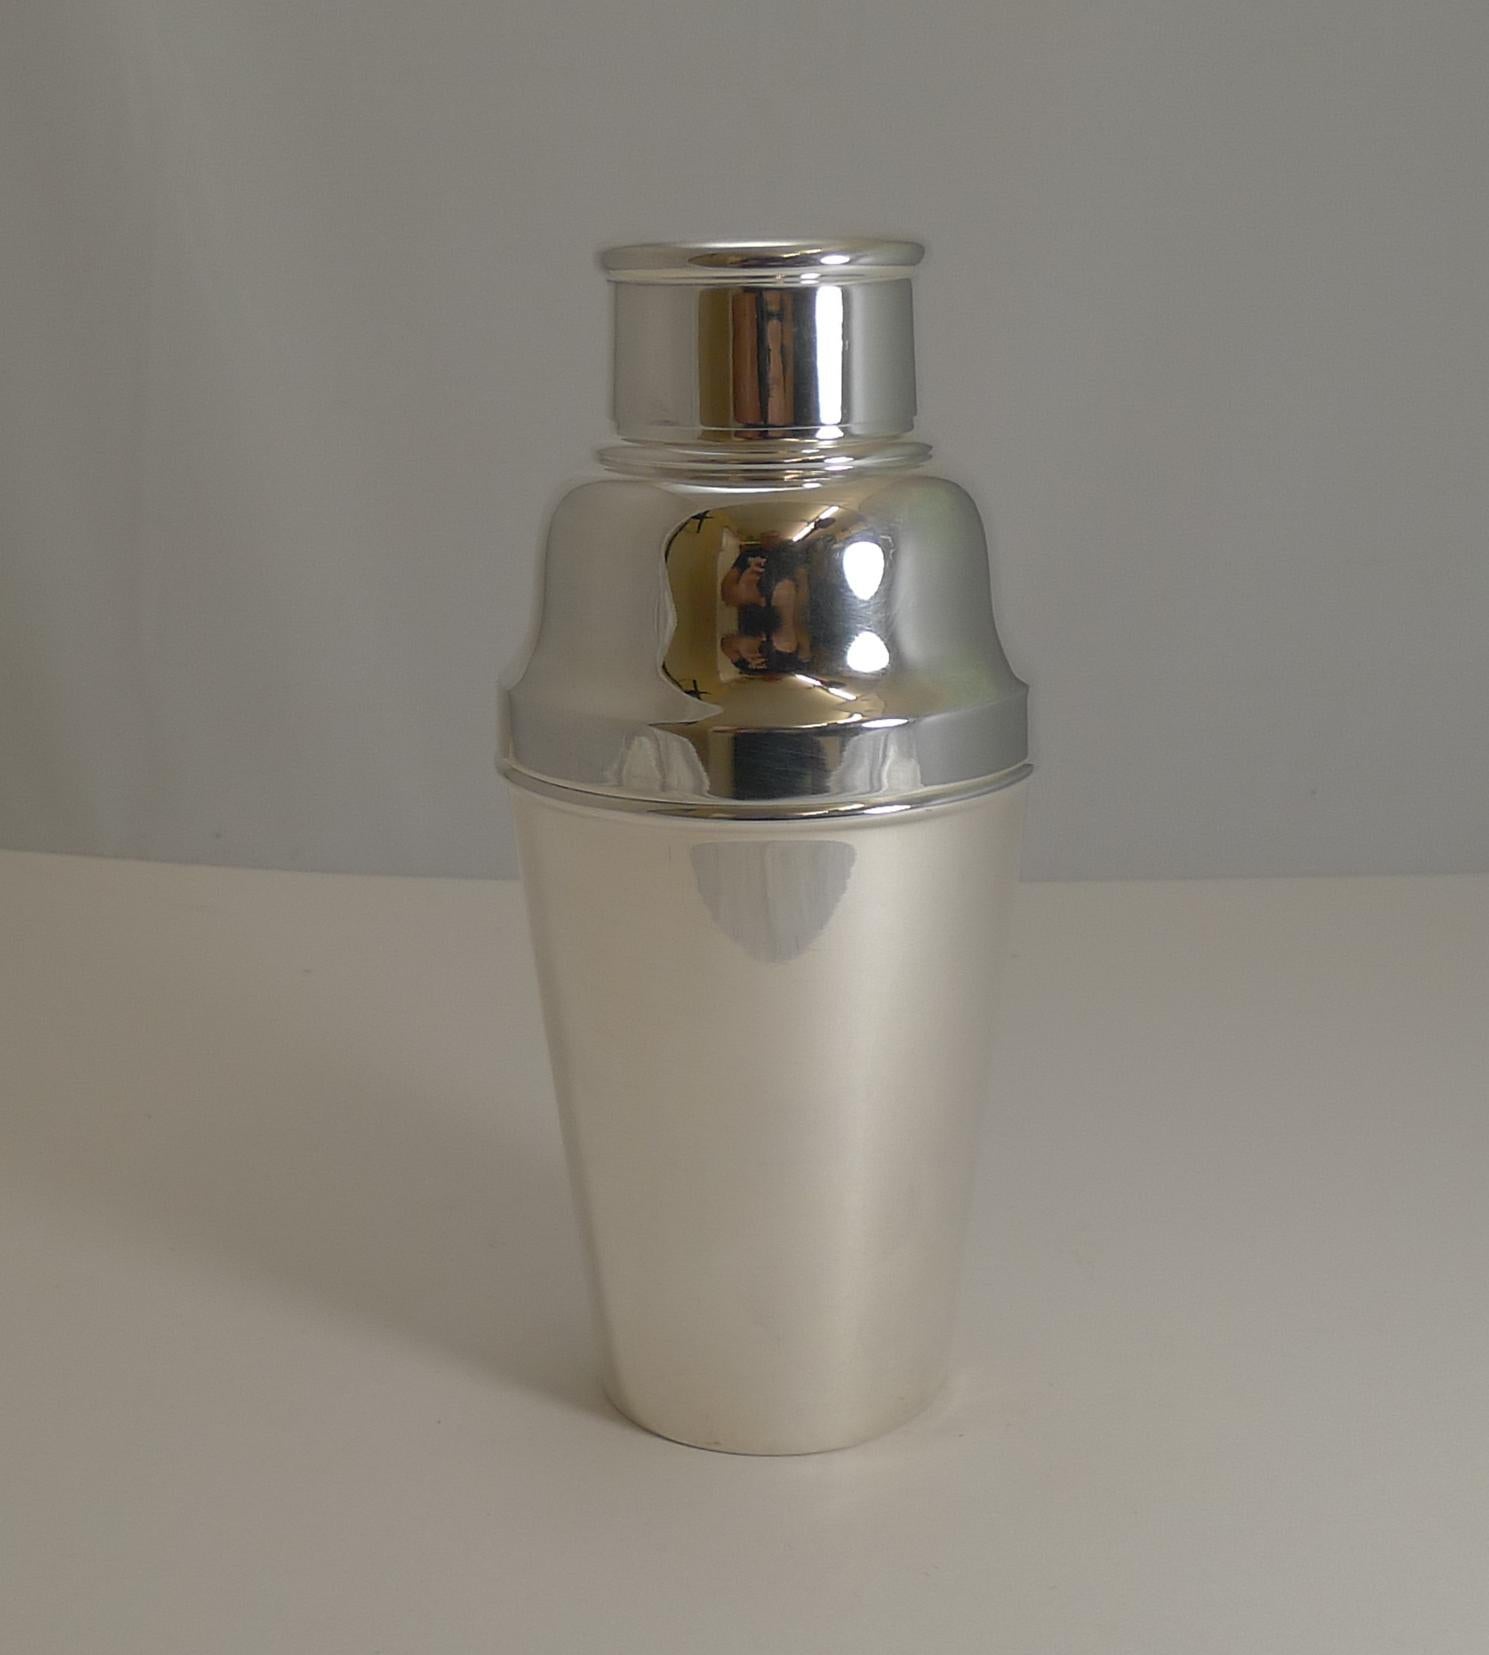 A wonderful large sized one and a half pint cocktail shaker in silver plate. Highly desirable, this one has an integral ice breaker which is revealed once the upper portion is removed.

The underside is signed by the silversmith William Suckling